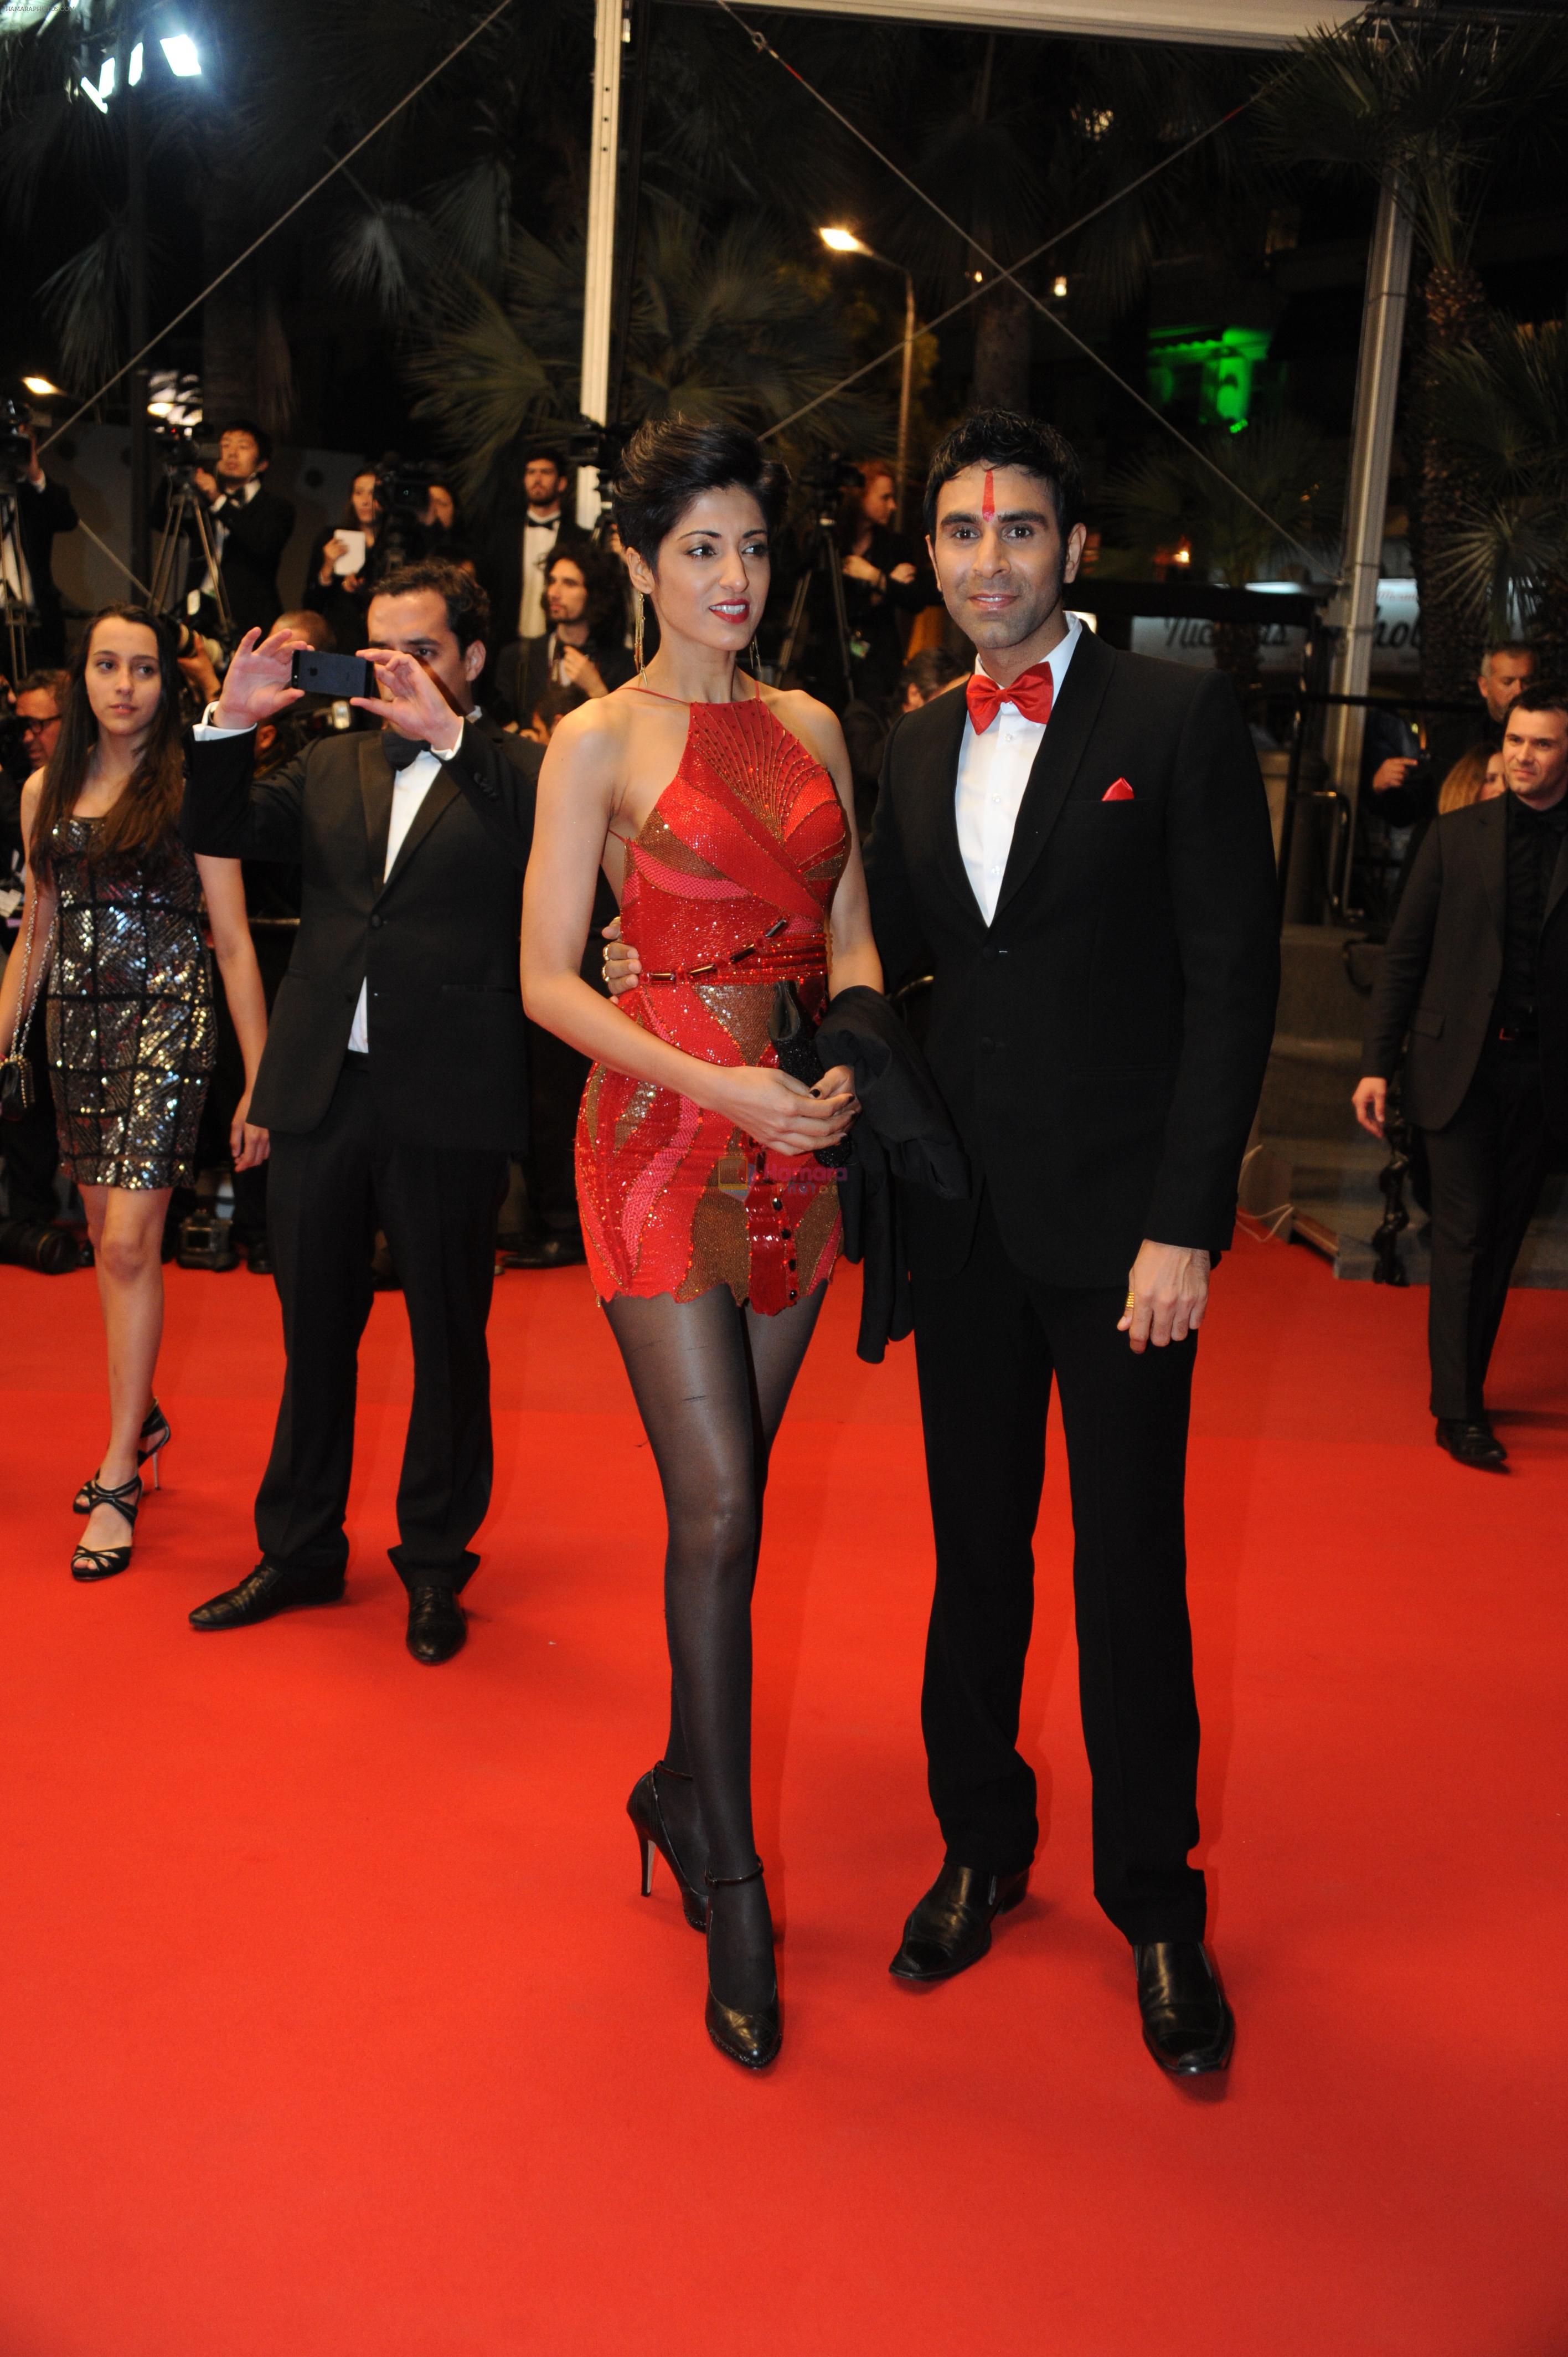 Jesse Randhawa and Sandip Soparkar at Cannes Film Festival on 17th May 2013